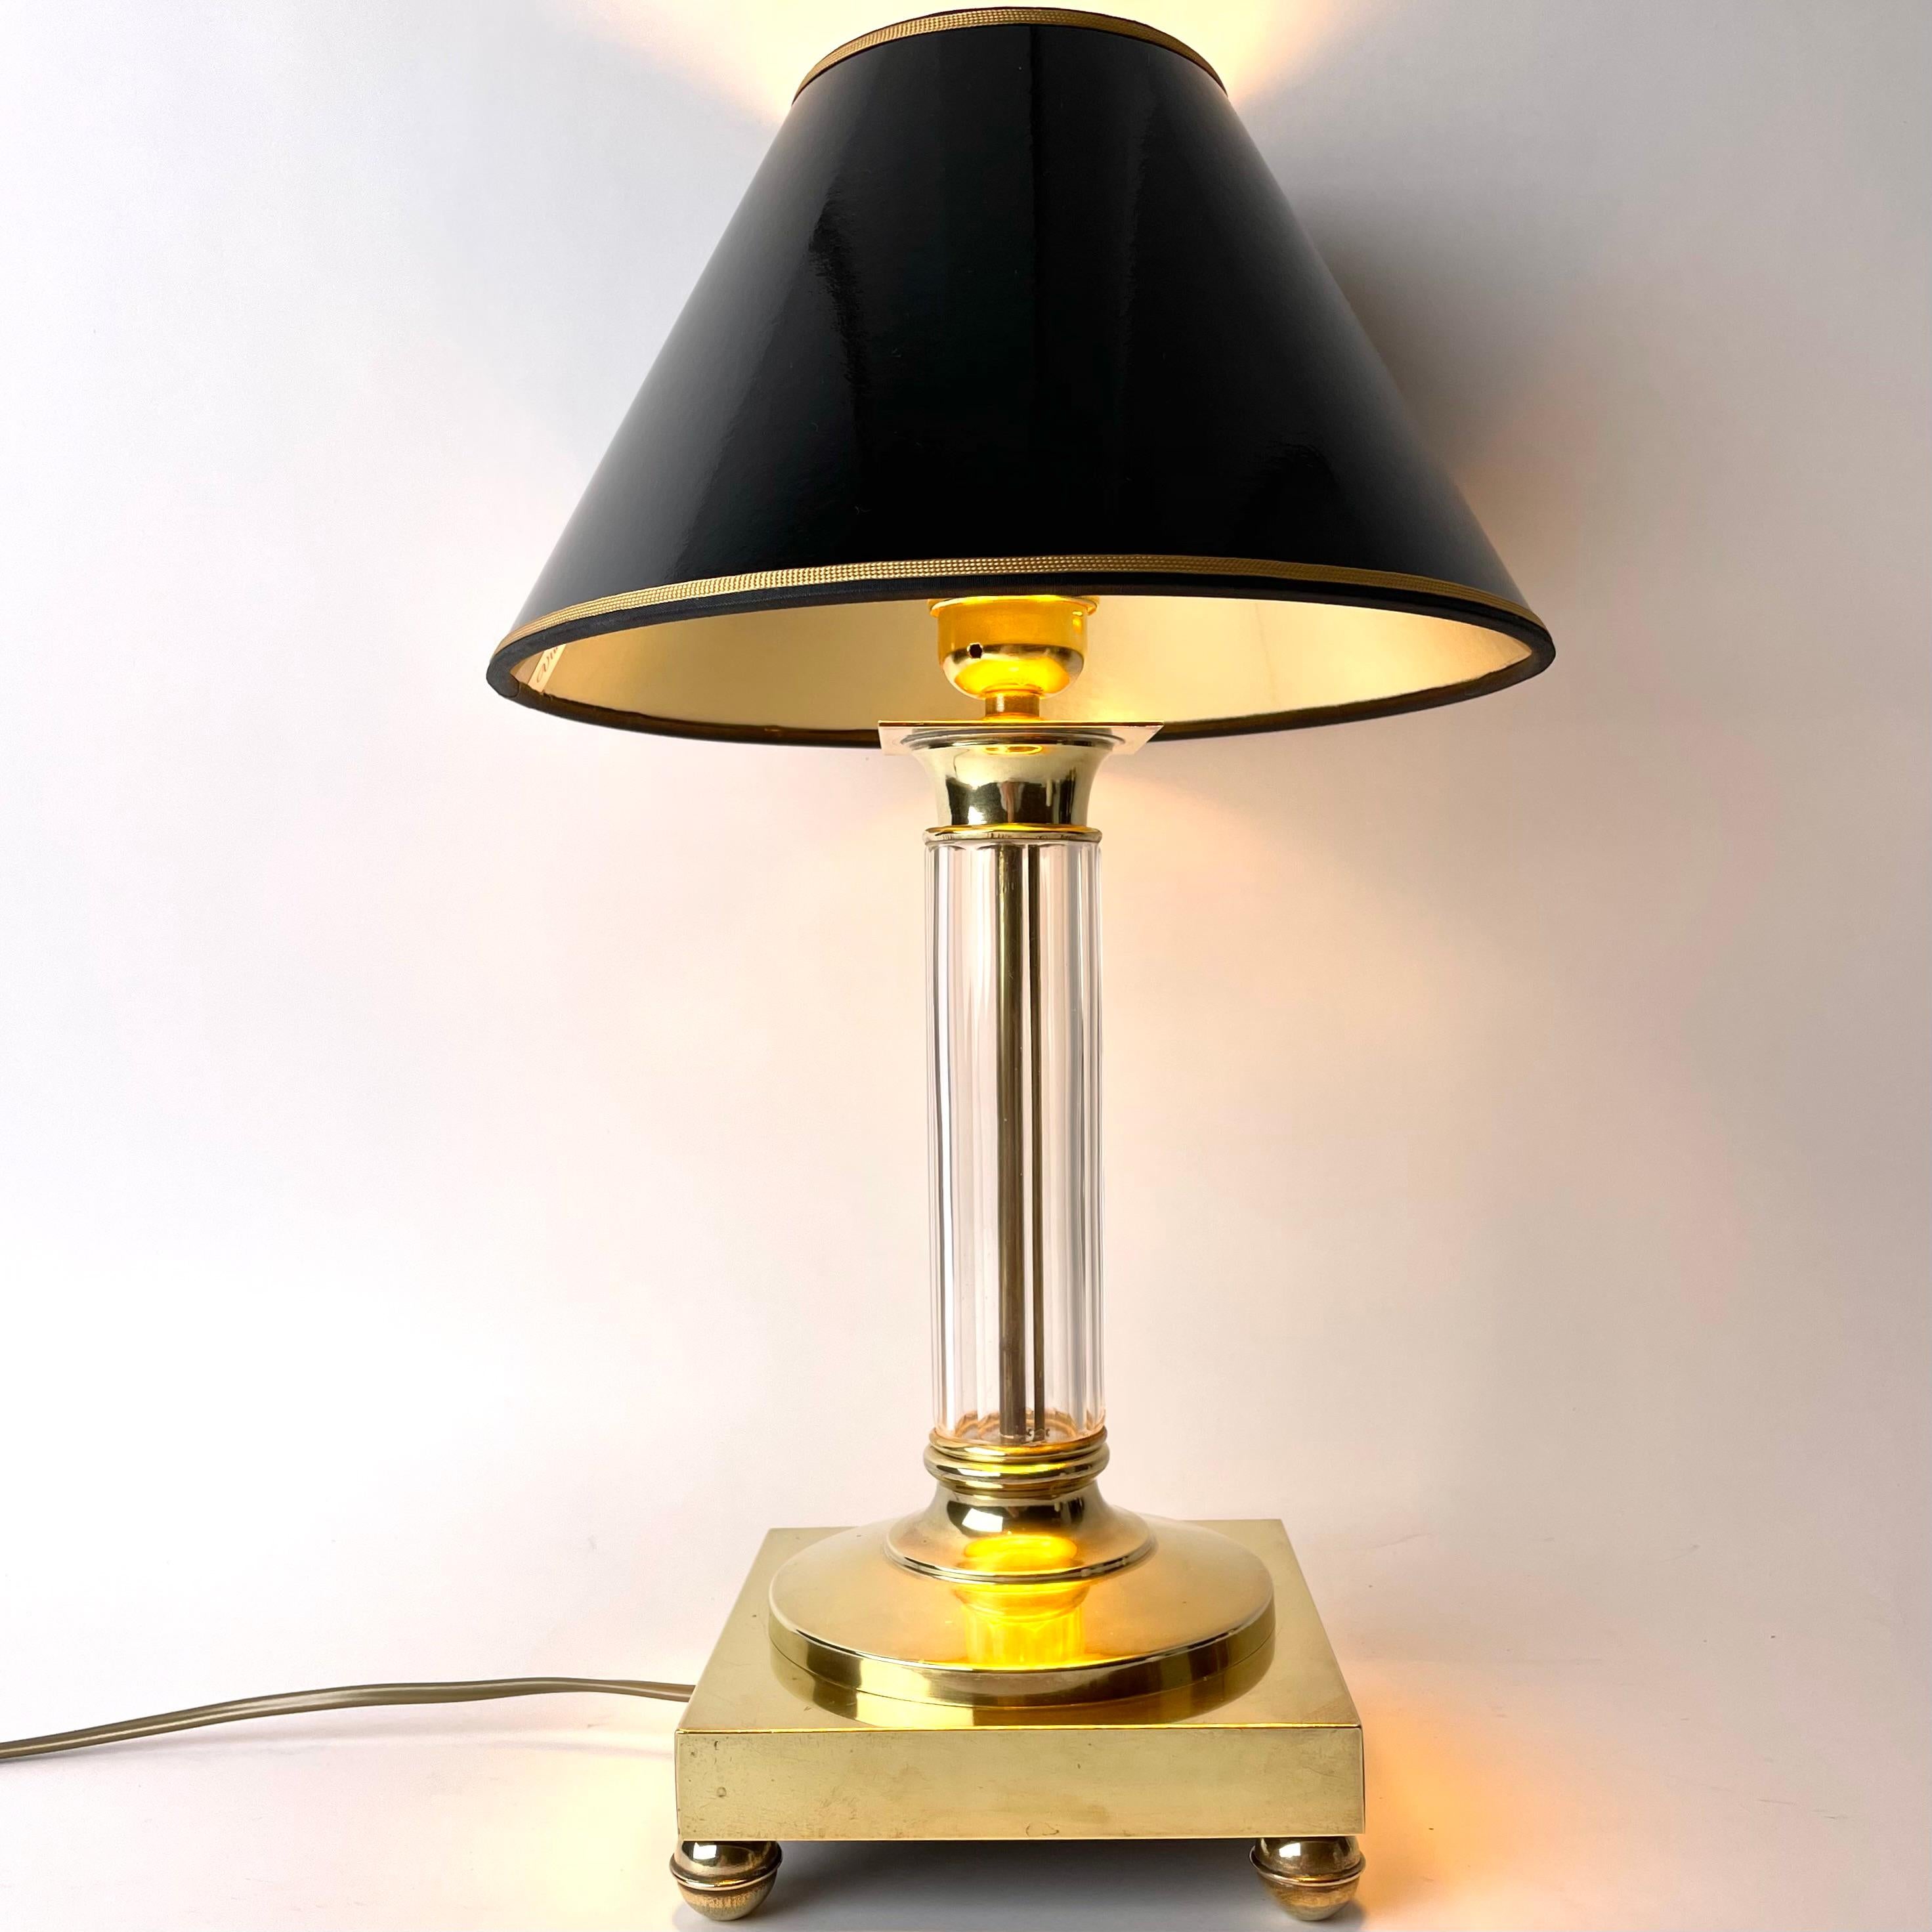 Table Lamp in Brass and Crystal Glass, Early 20th Century.

An elegant and refined modern yet classical table lamp. Consisting of a traditional column-structure, it reinvents the classical column lamp with a see through smooth shaft in crystal,